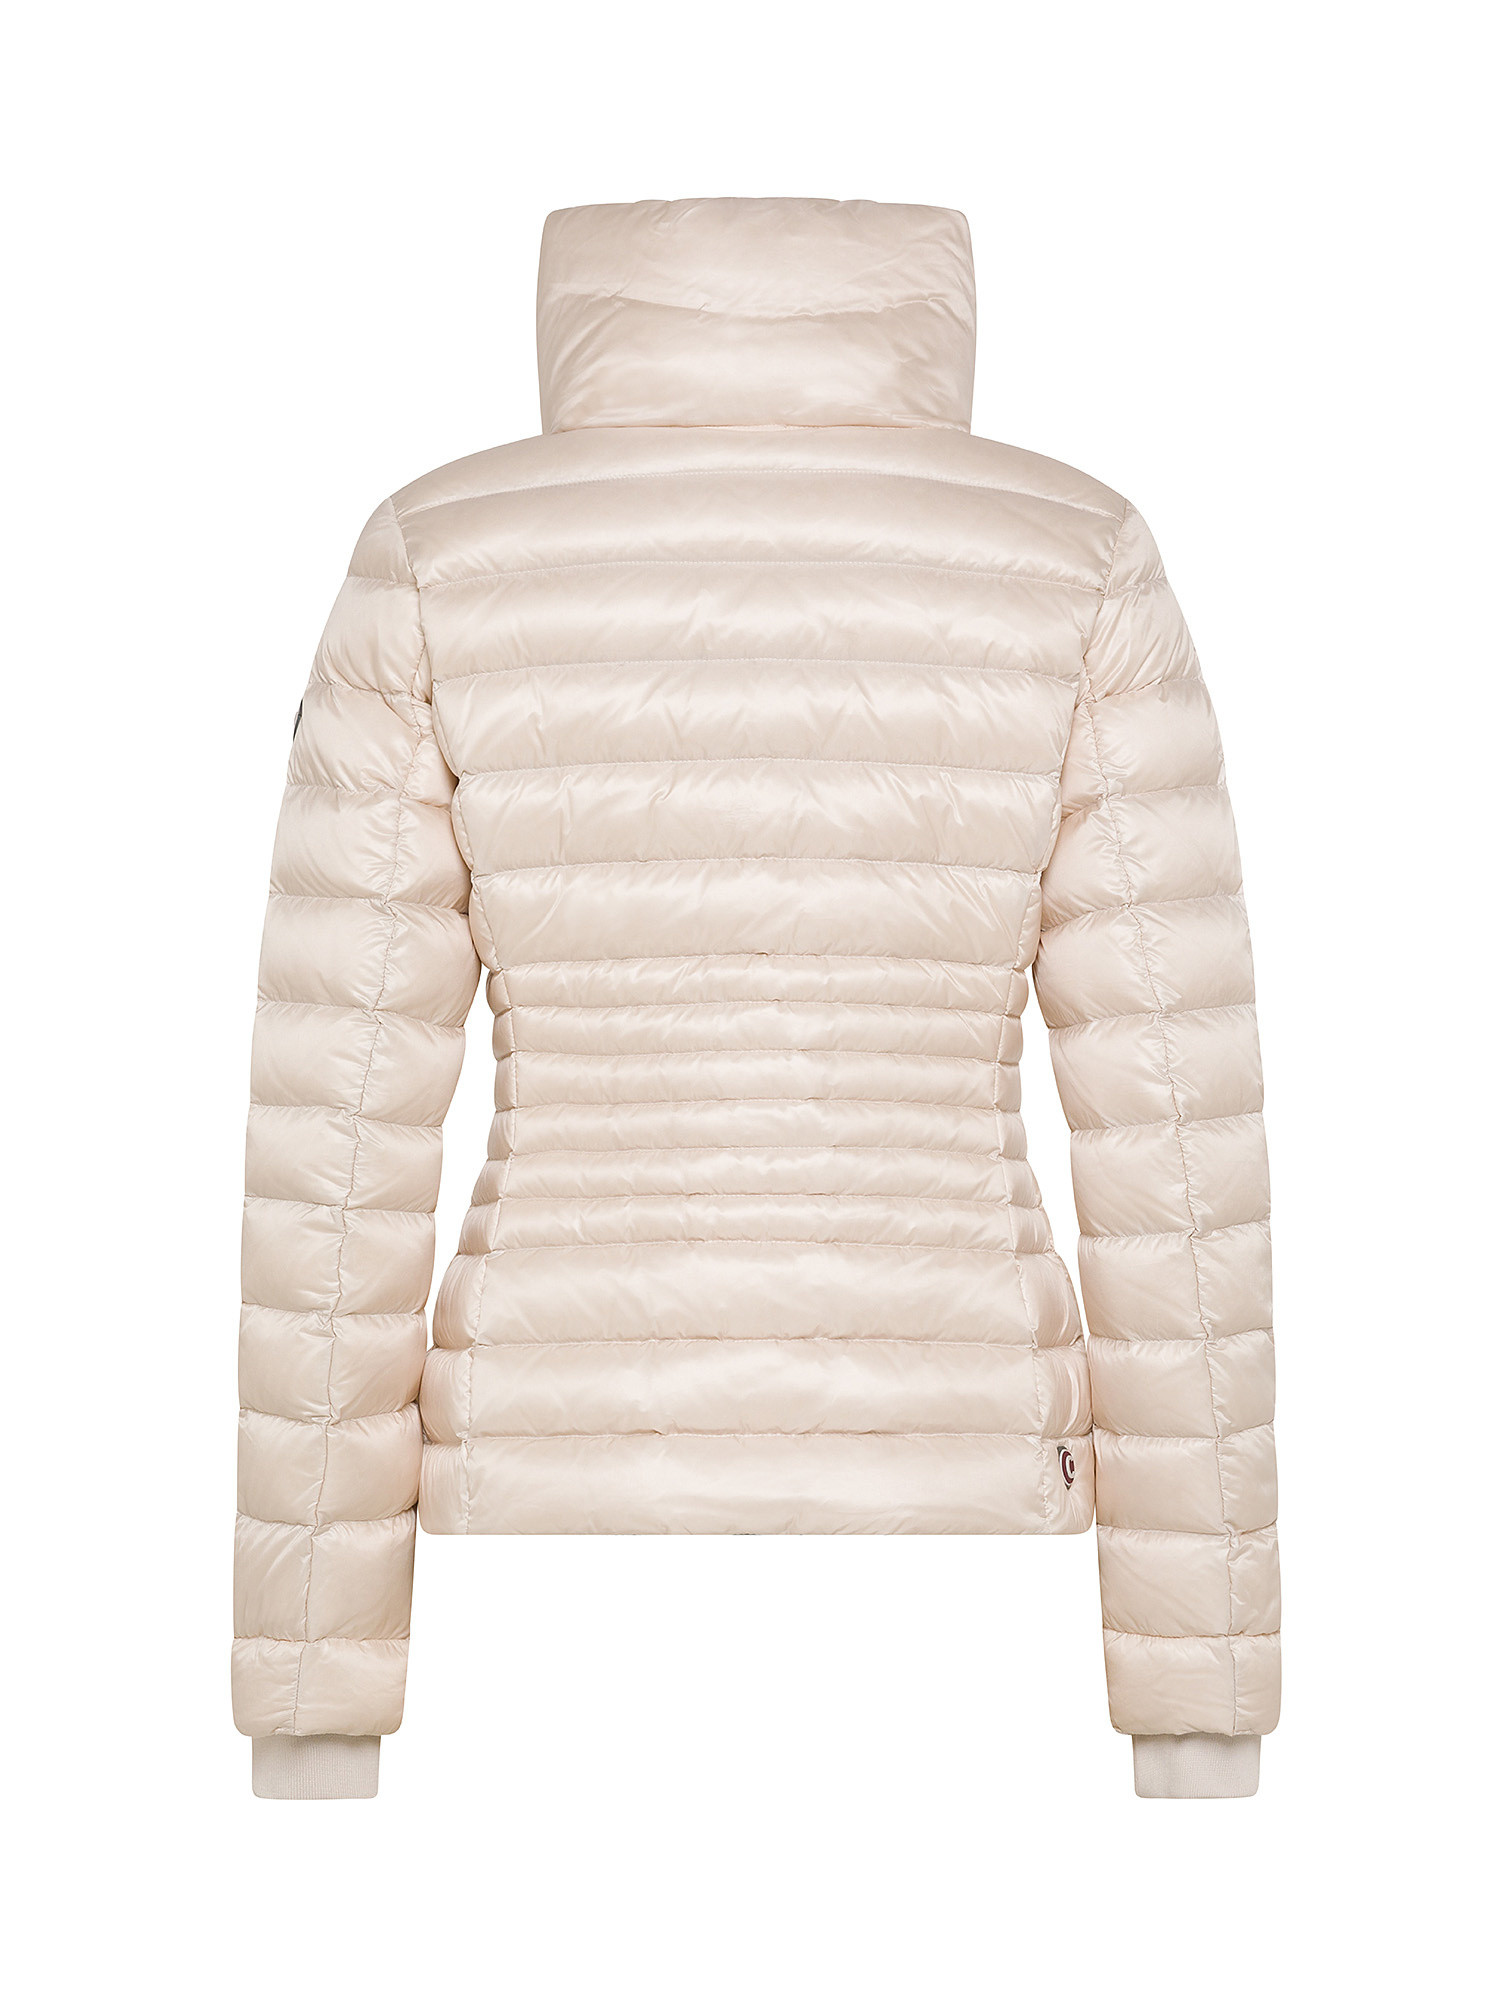 Quilted jacket with high collar, Beige, large image number 1